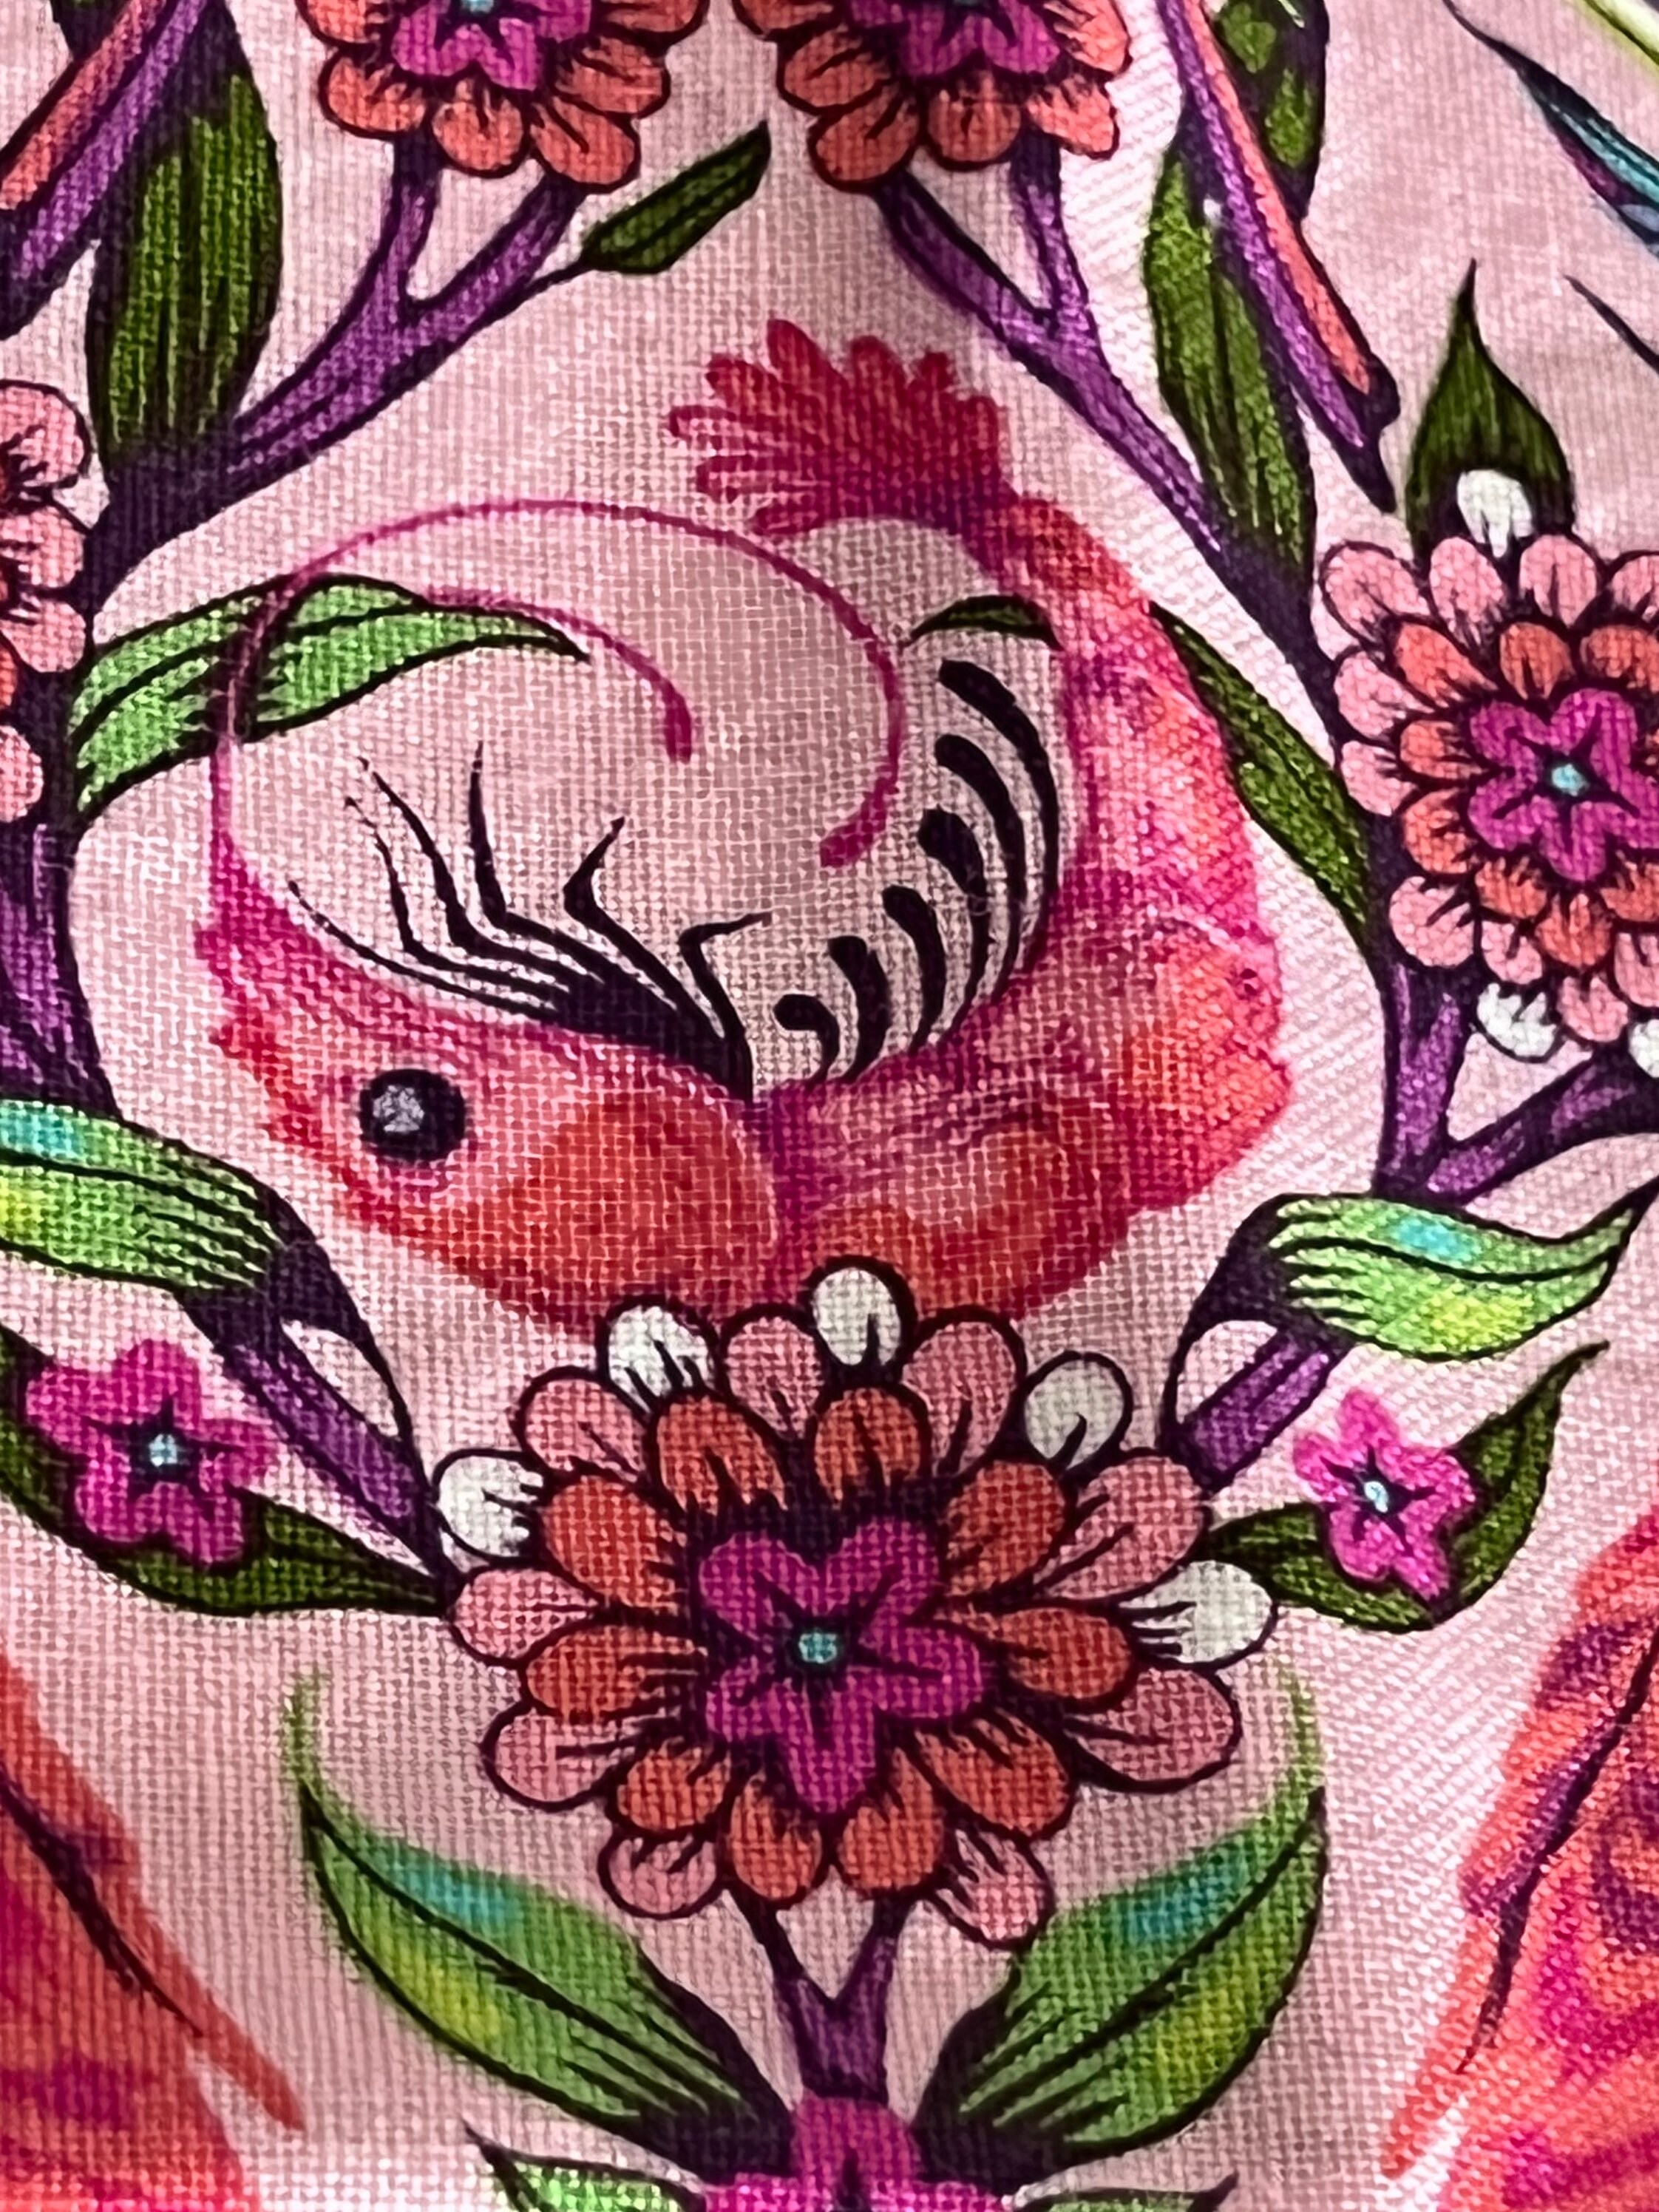 Tula Pink Fabric DAYDREAMER PWTP169 Pretty in Pink in Dragonfruit